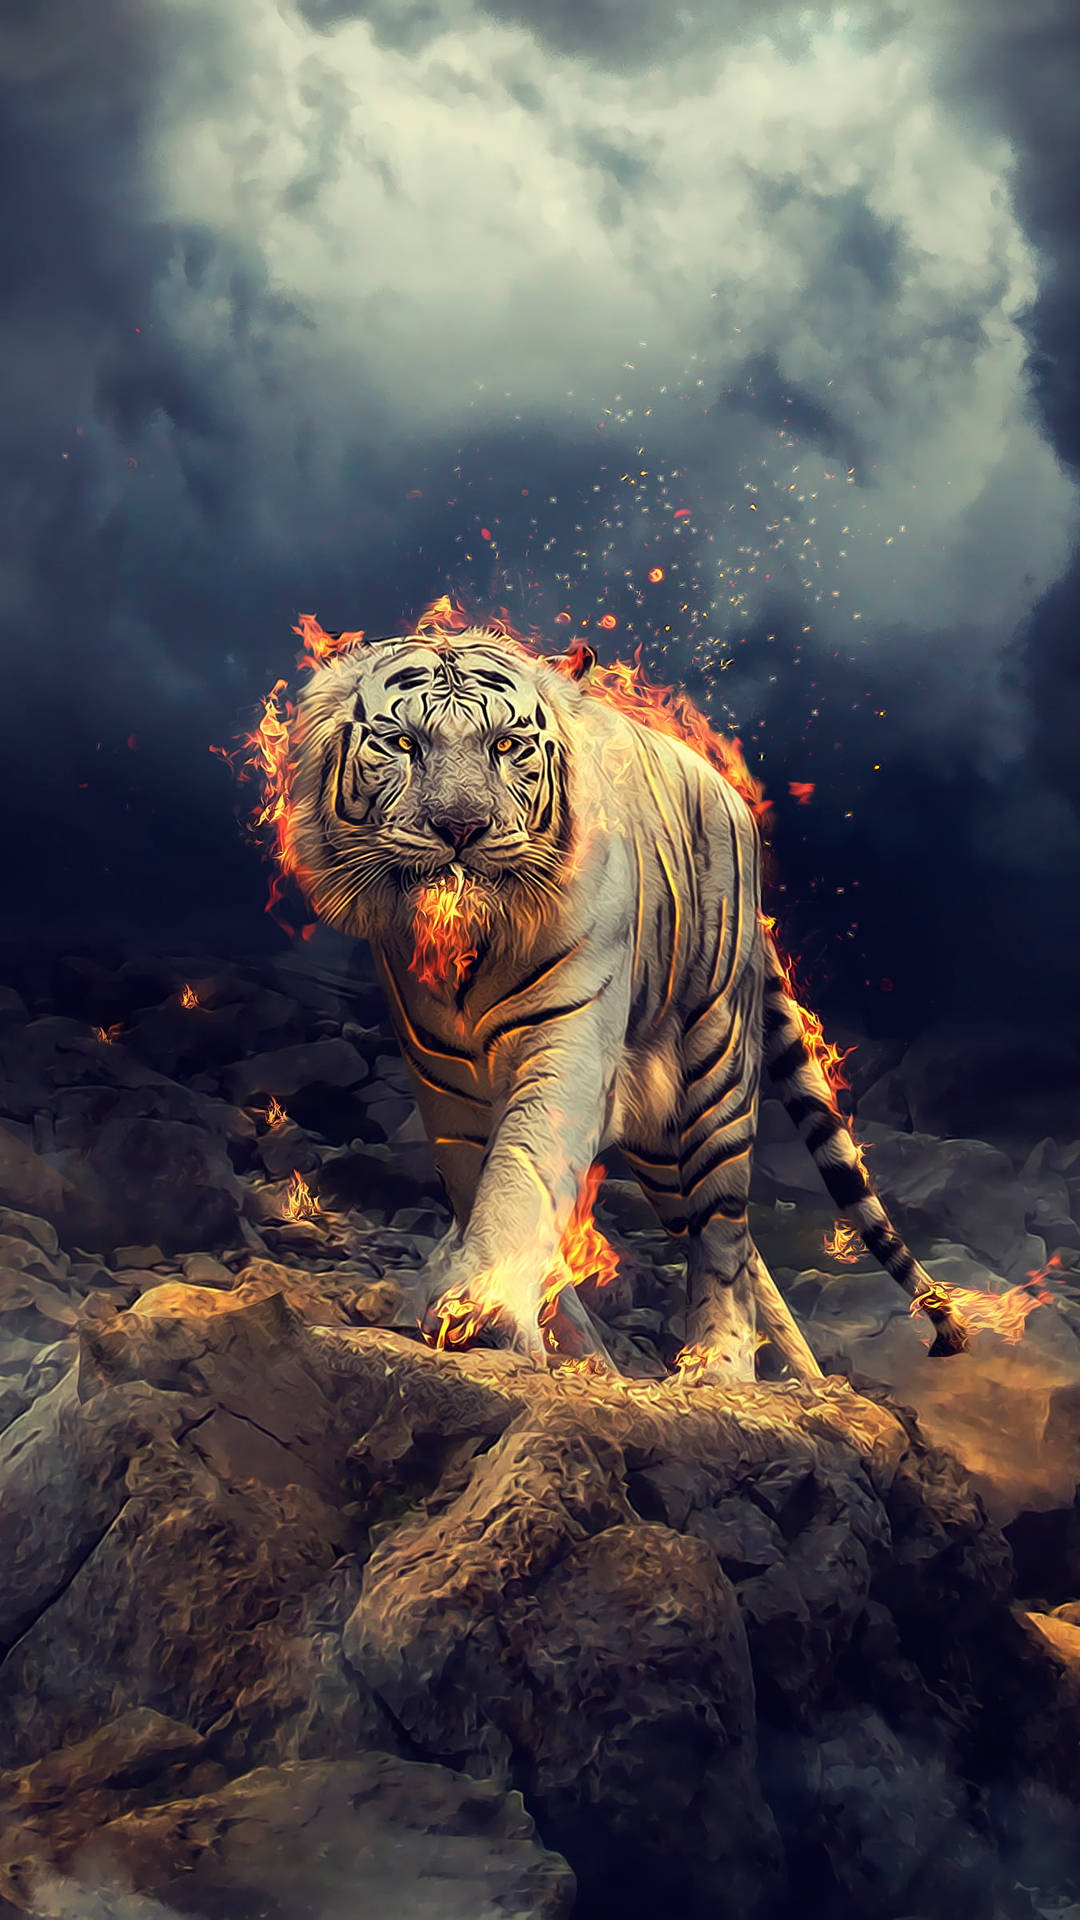 Cool Tiger Art With Fiery Embers Picture